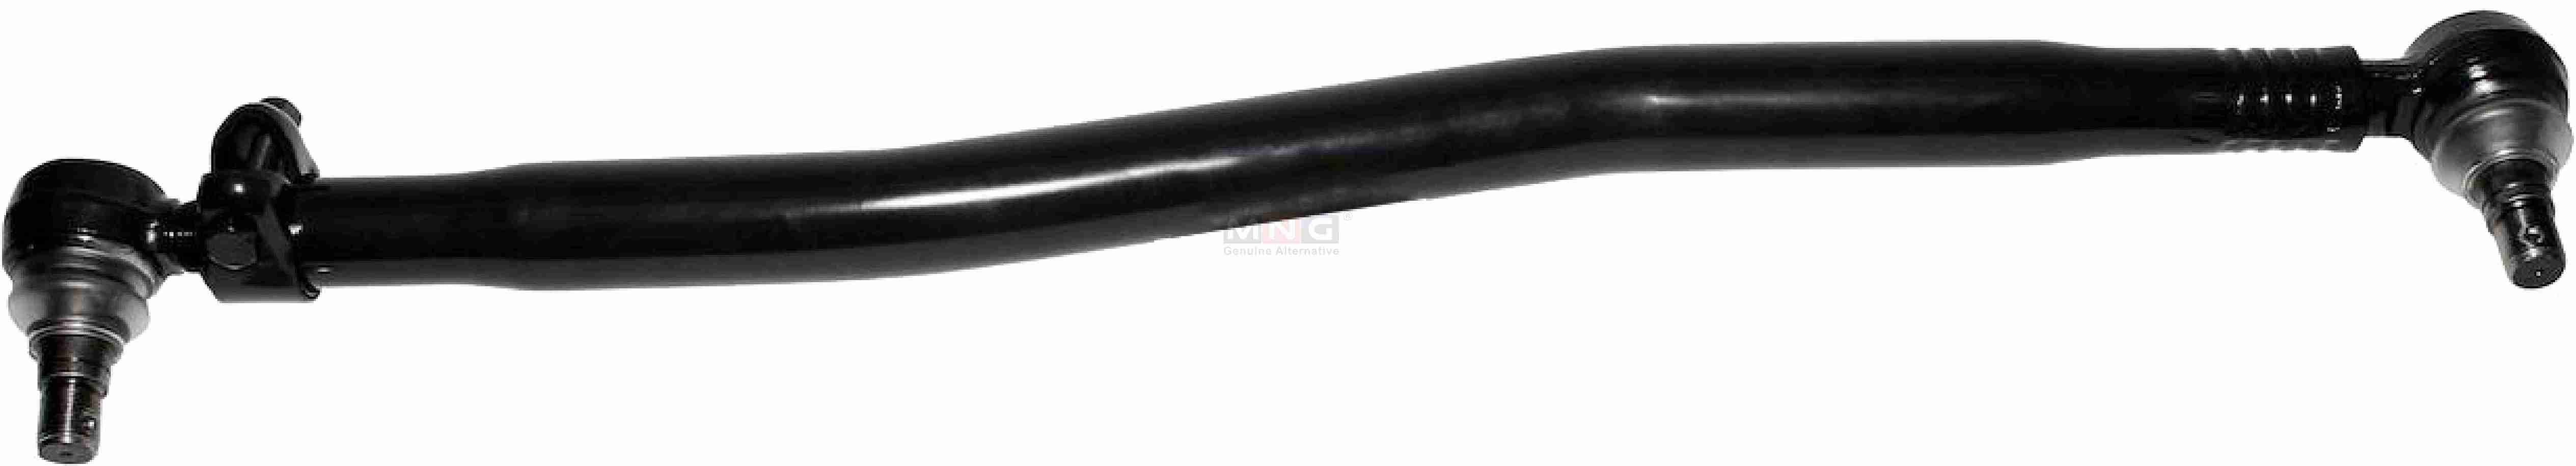 MNG Spare Parts 500-904 replaces Drag Link replaces Iveco 41215165